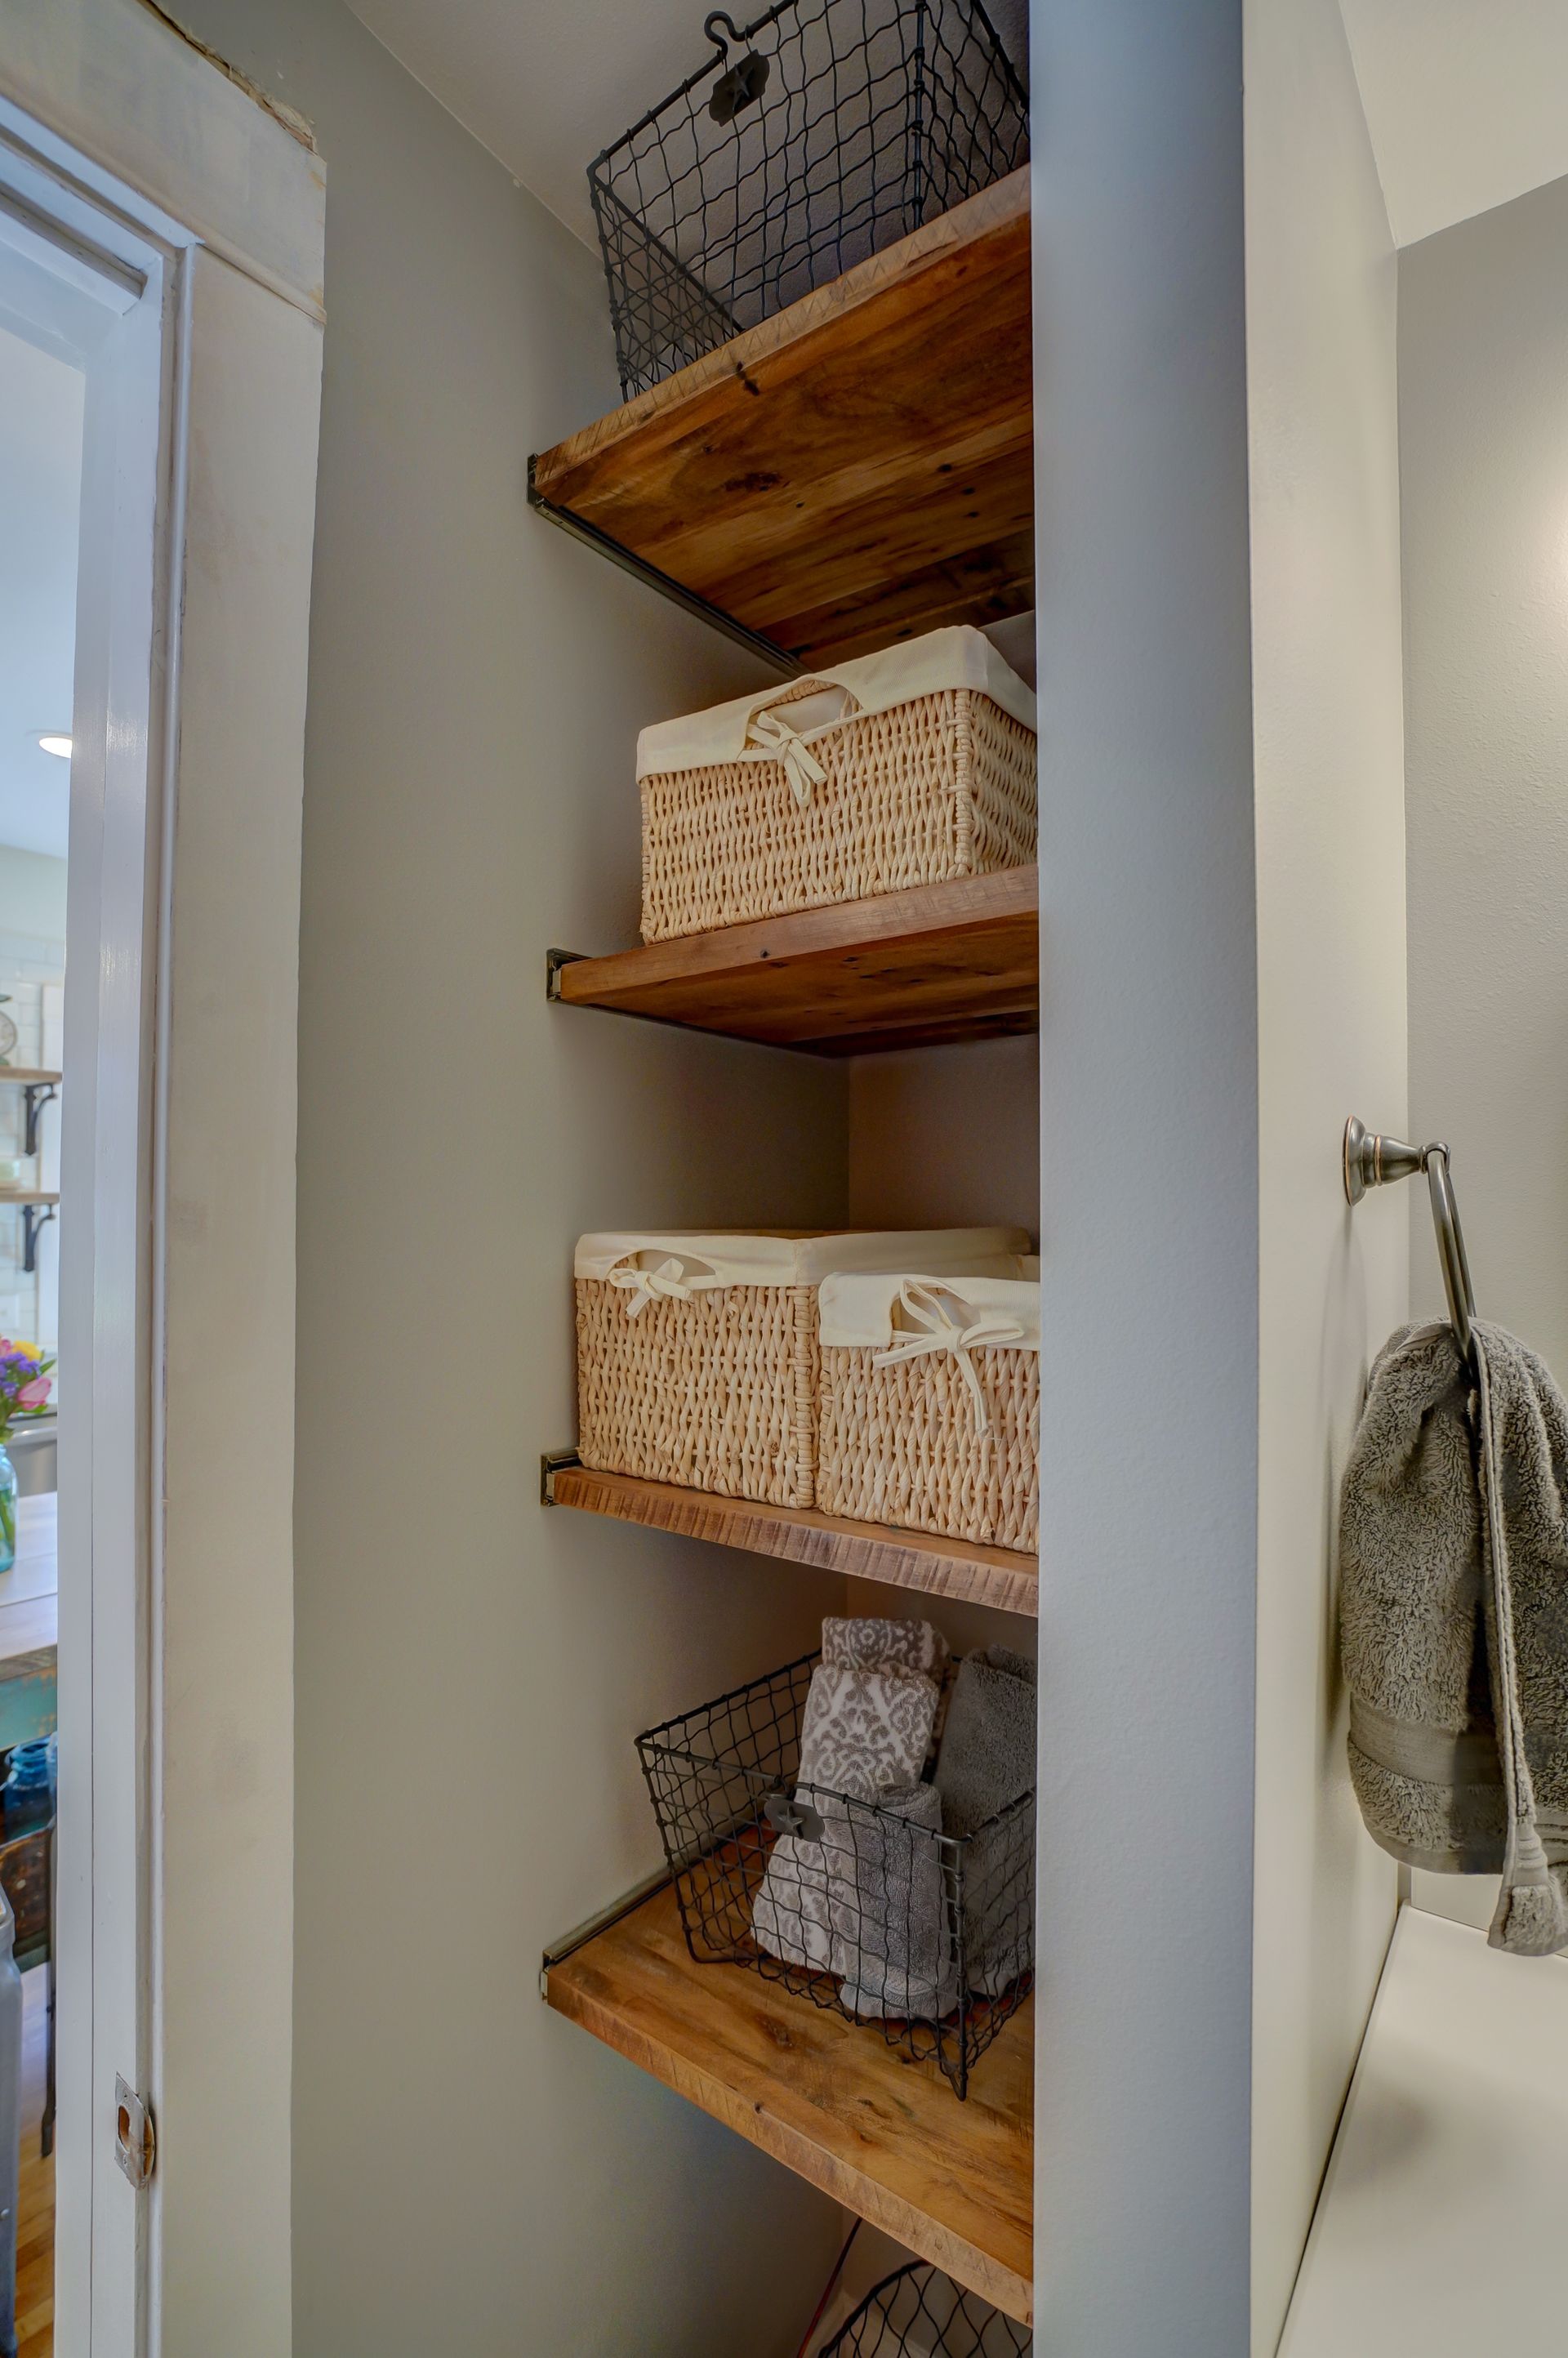 A closet with wooden shelves and baskets in it.